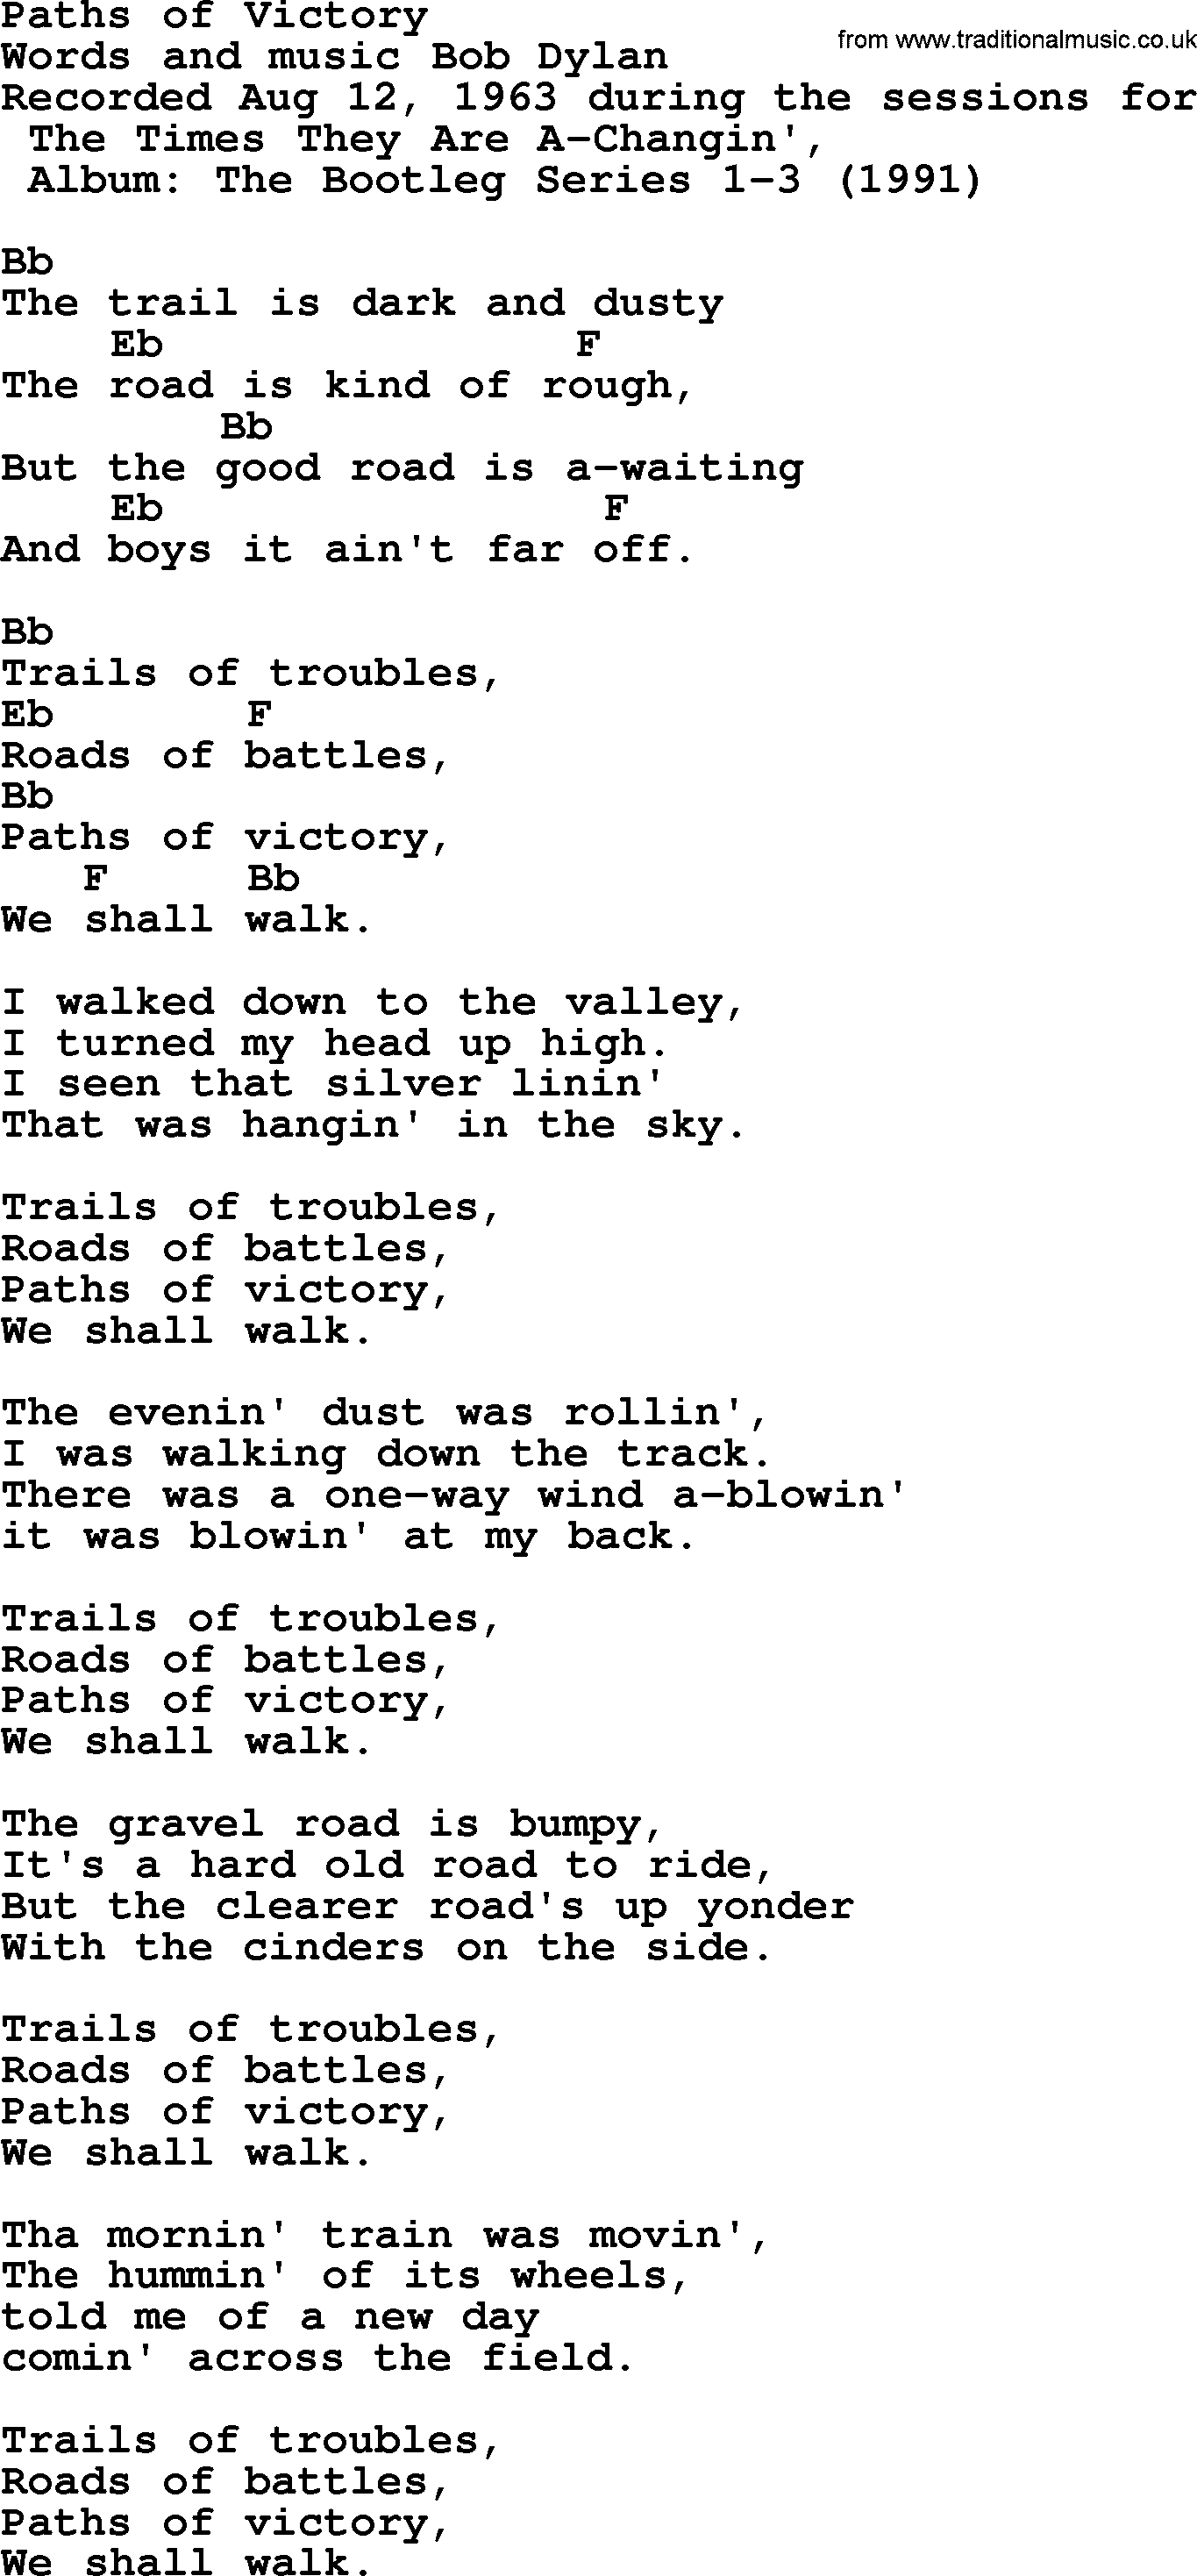 Bob Dylan song, lyrics with chords - Paths of Victory